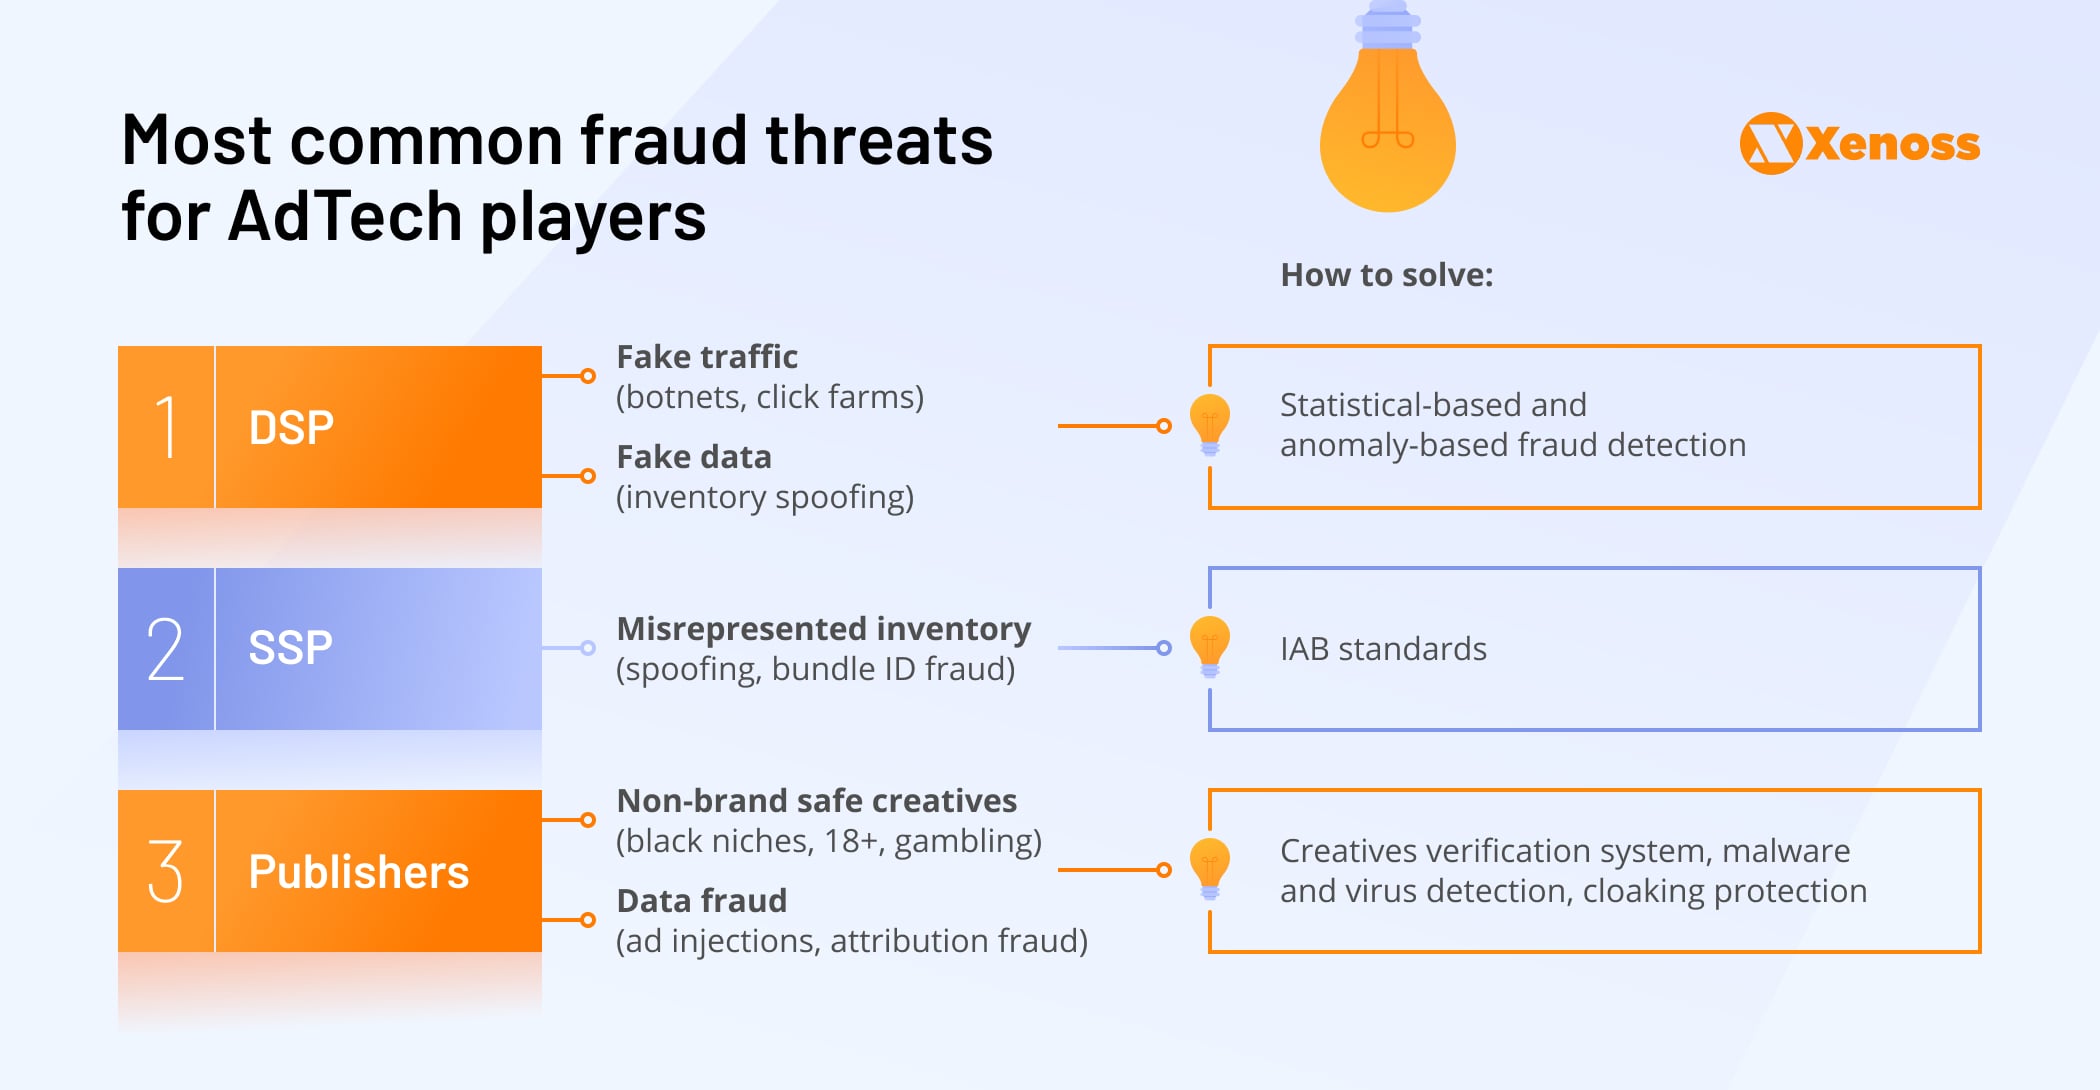 Programmatic platforms - their main fraud threats and solutions 